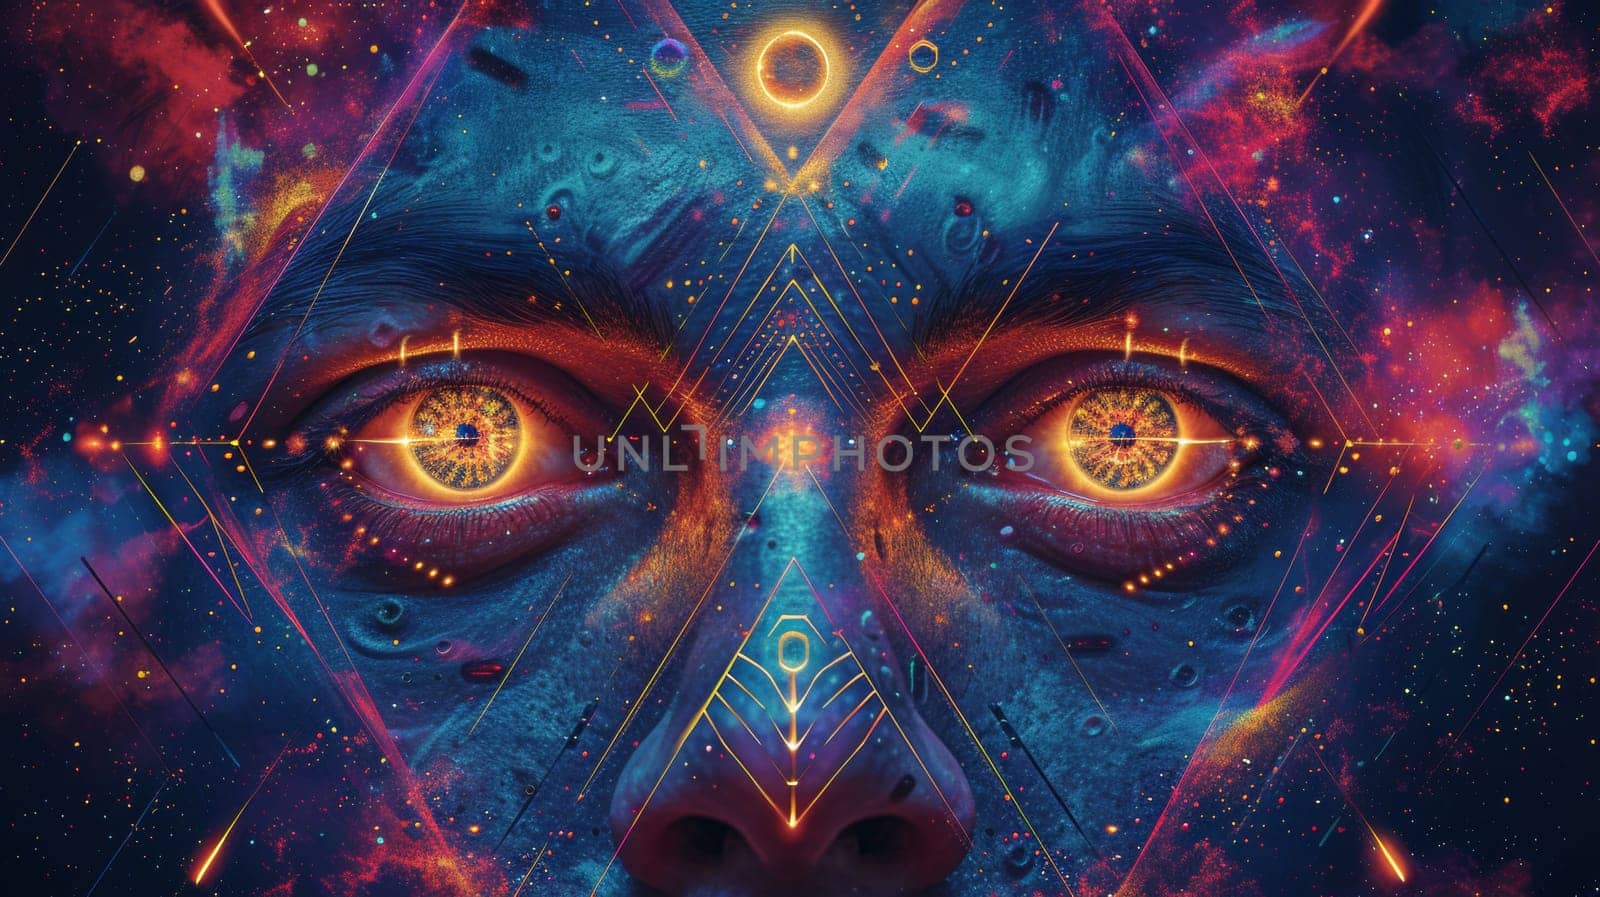 A close up of a face with glowing eyes and cosmic background